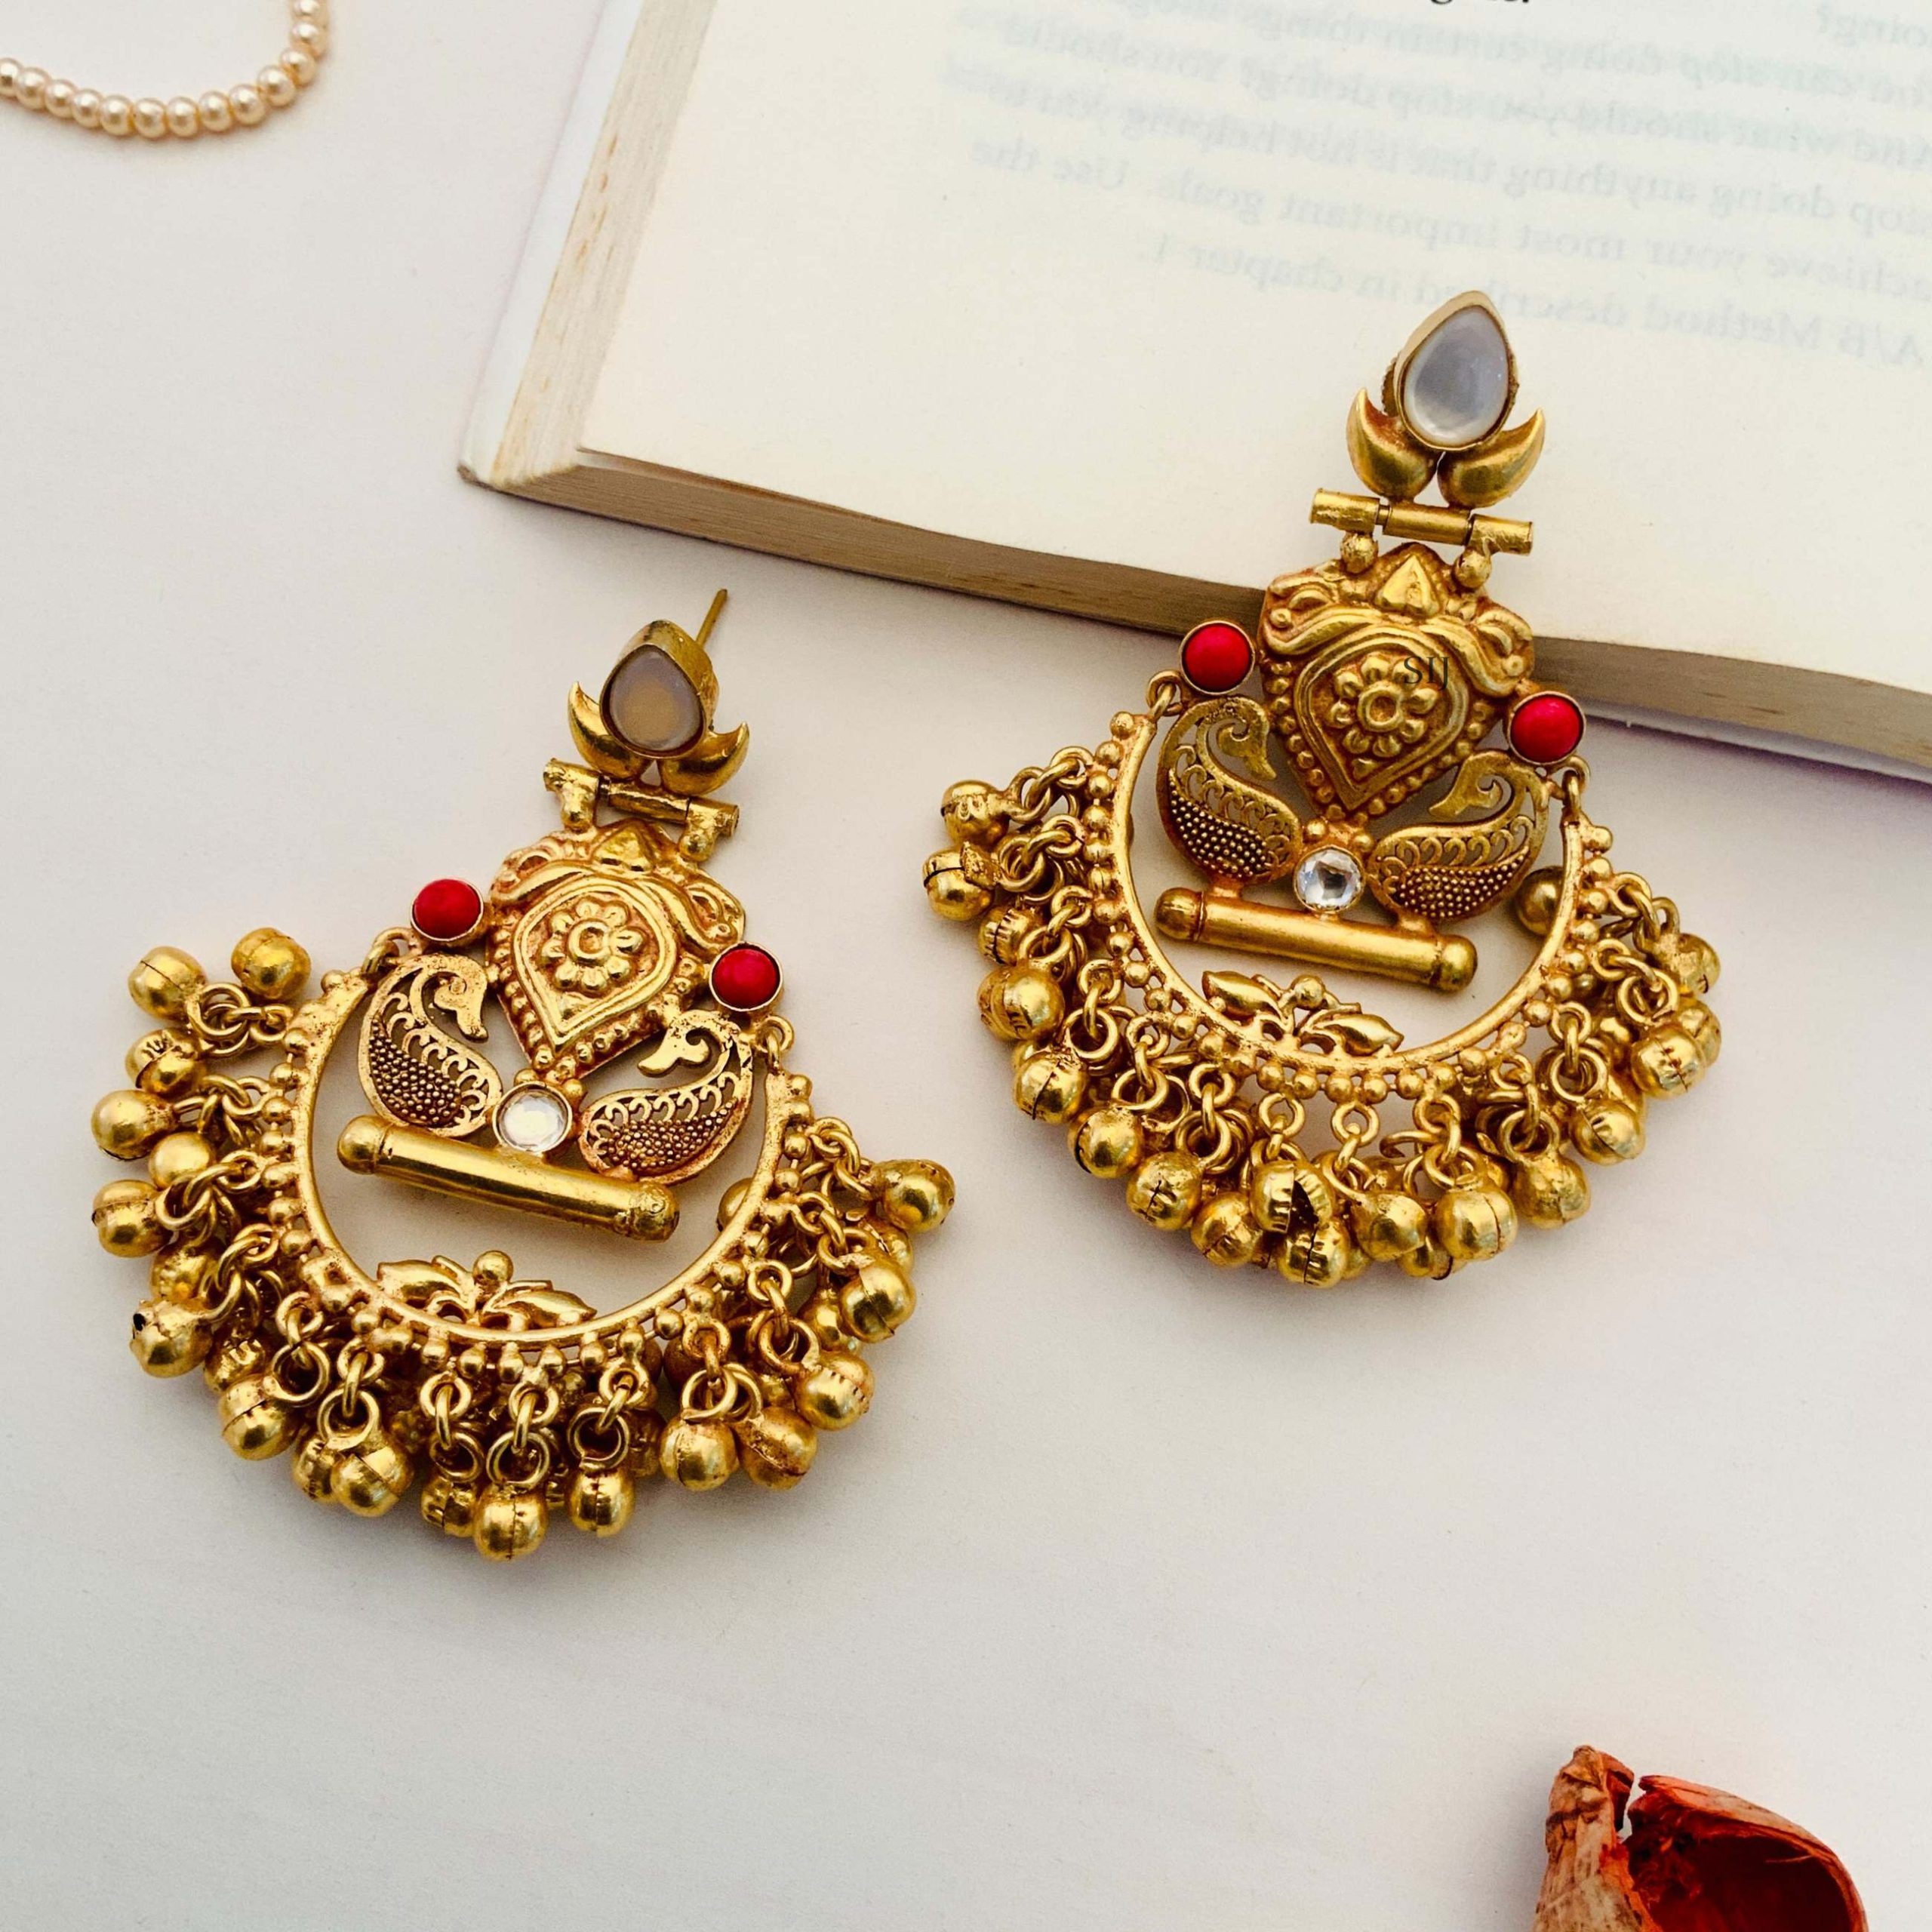 Gold Finish Chand Bali Earrings with Gold Beads